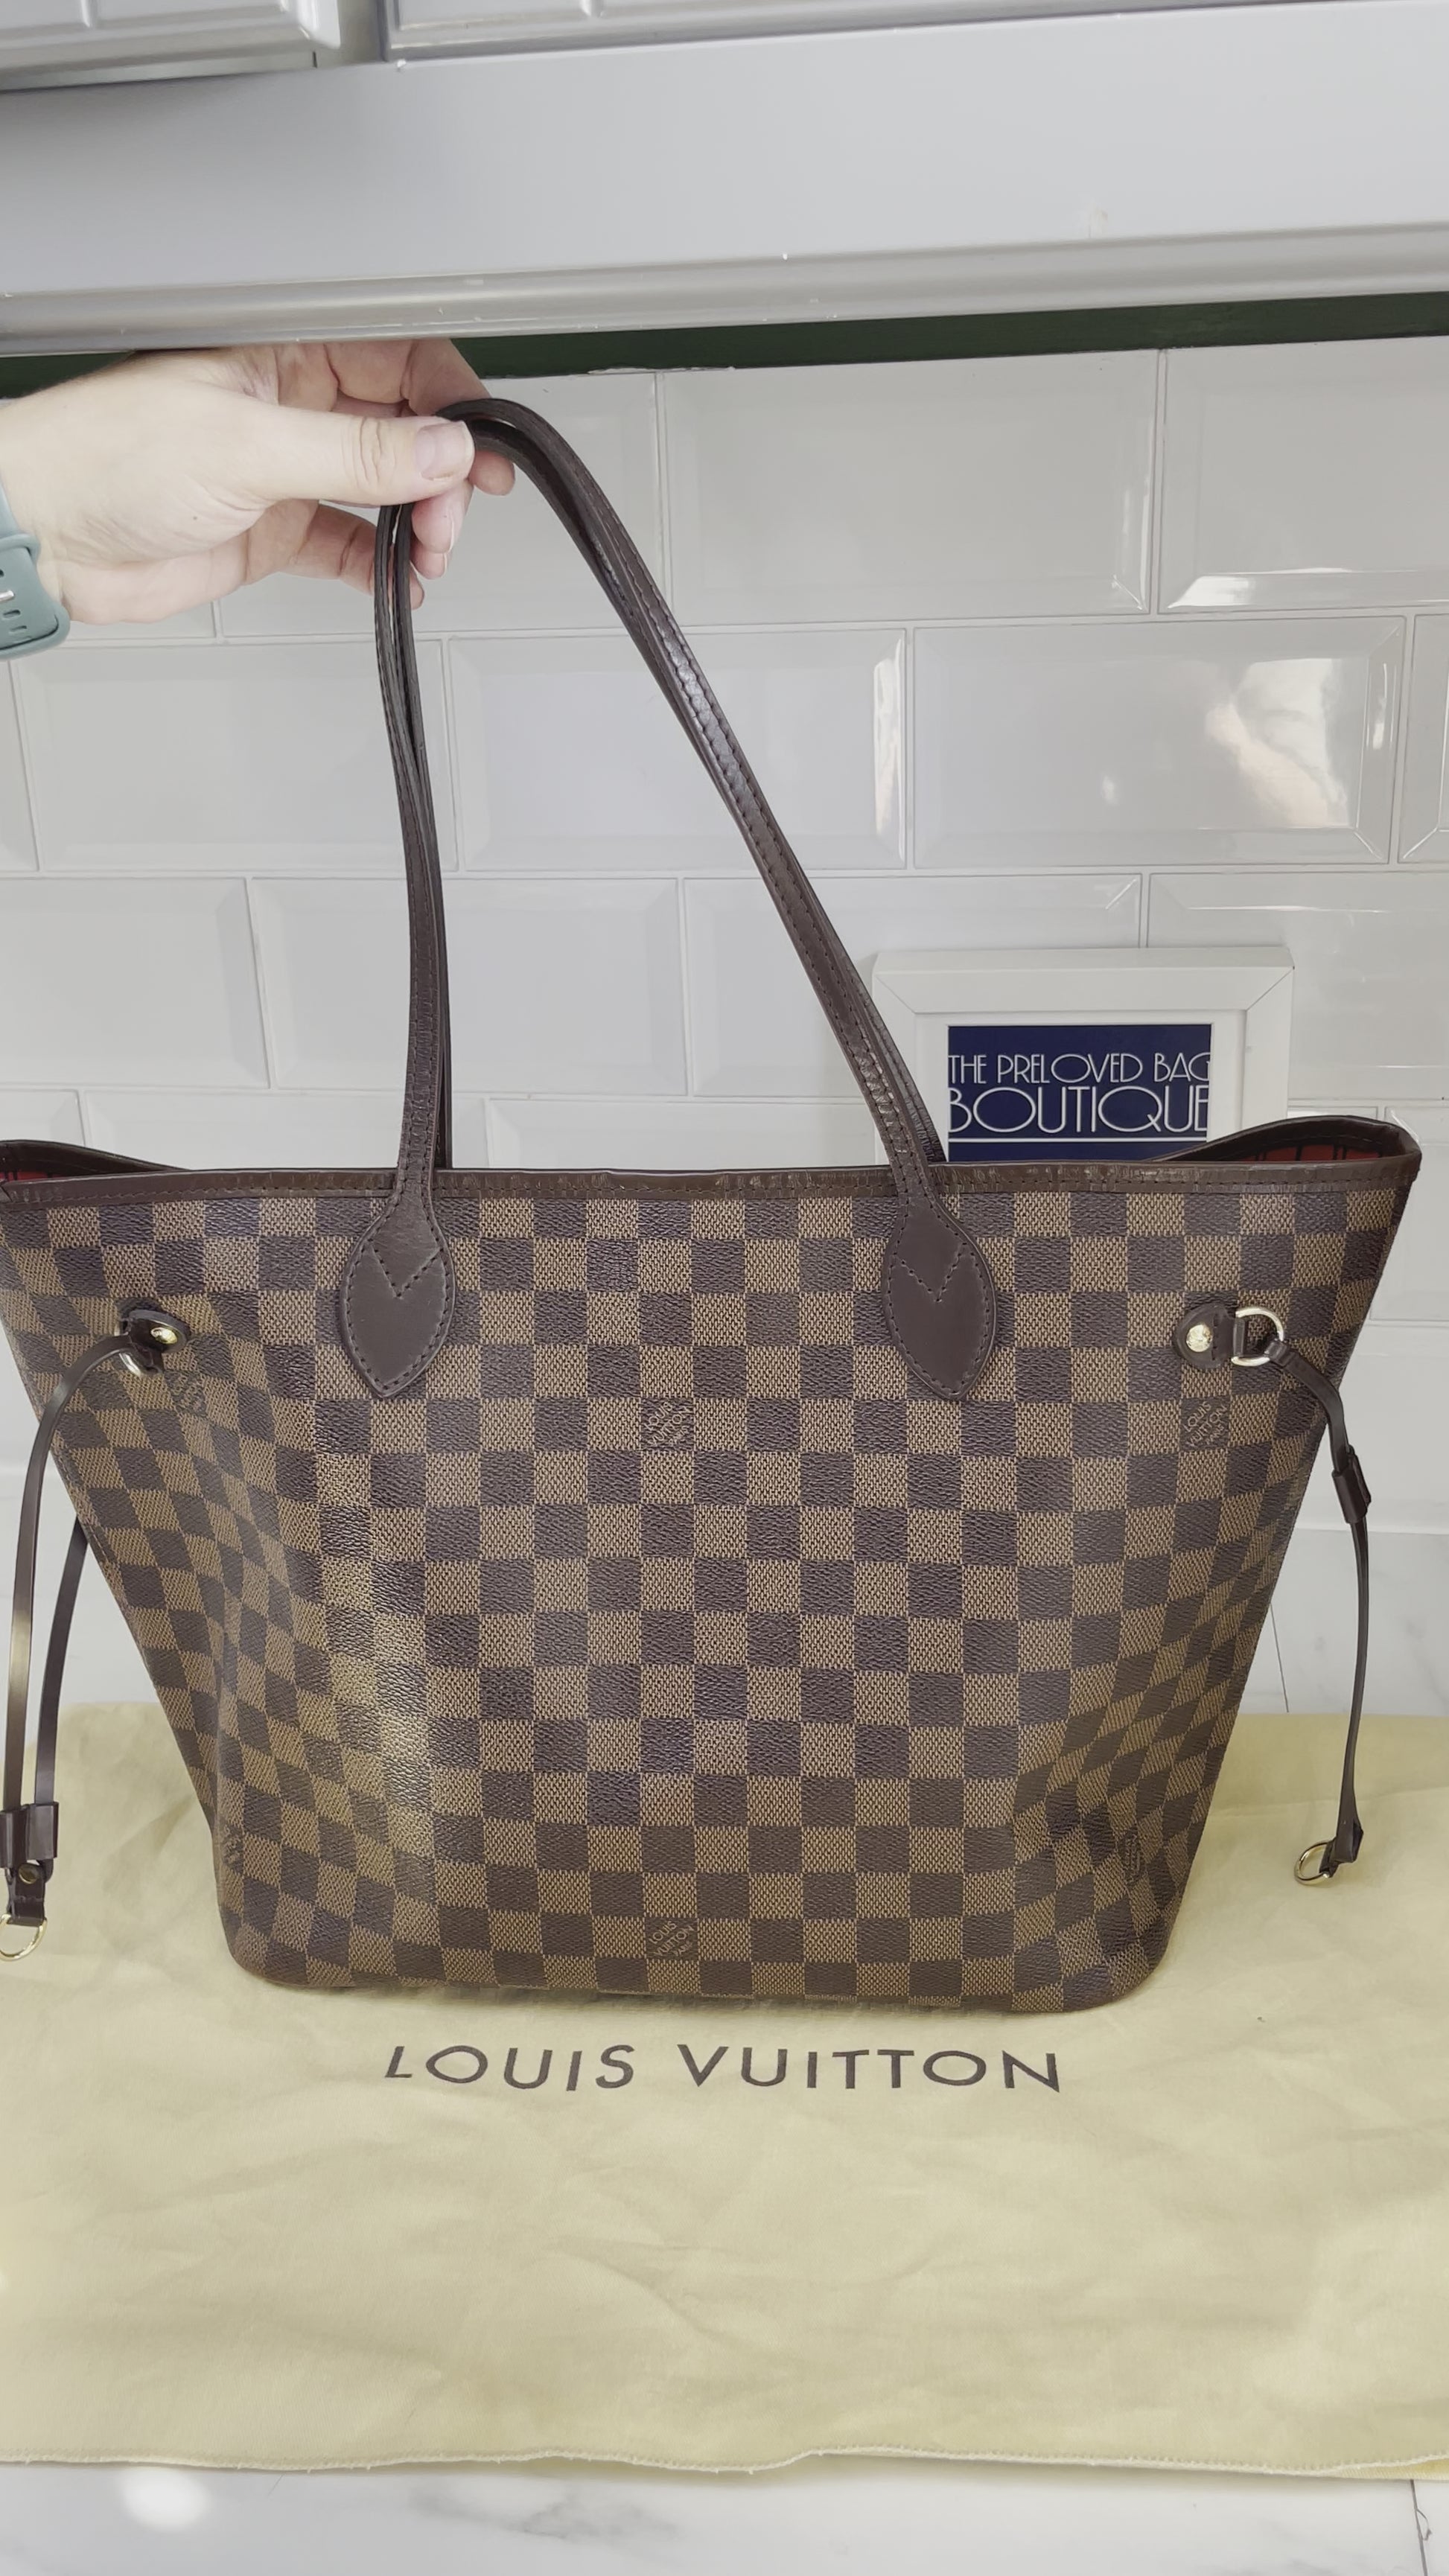 Louis Vuitton Neverfull Bags for sale in Birmingham, United